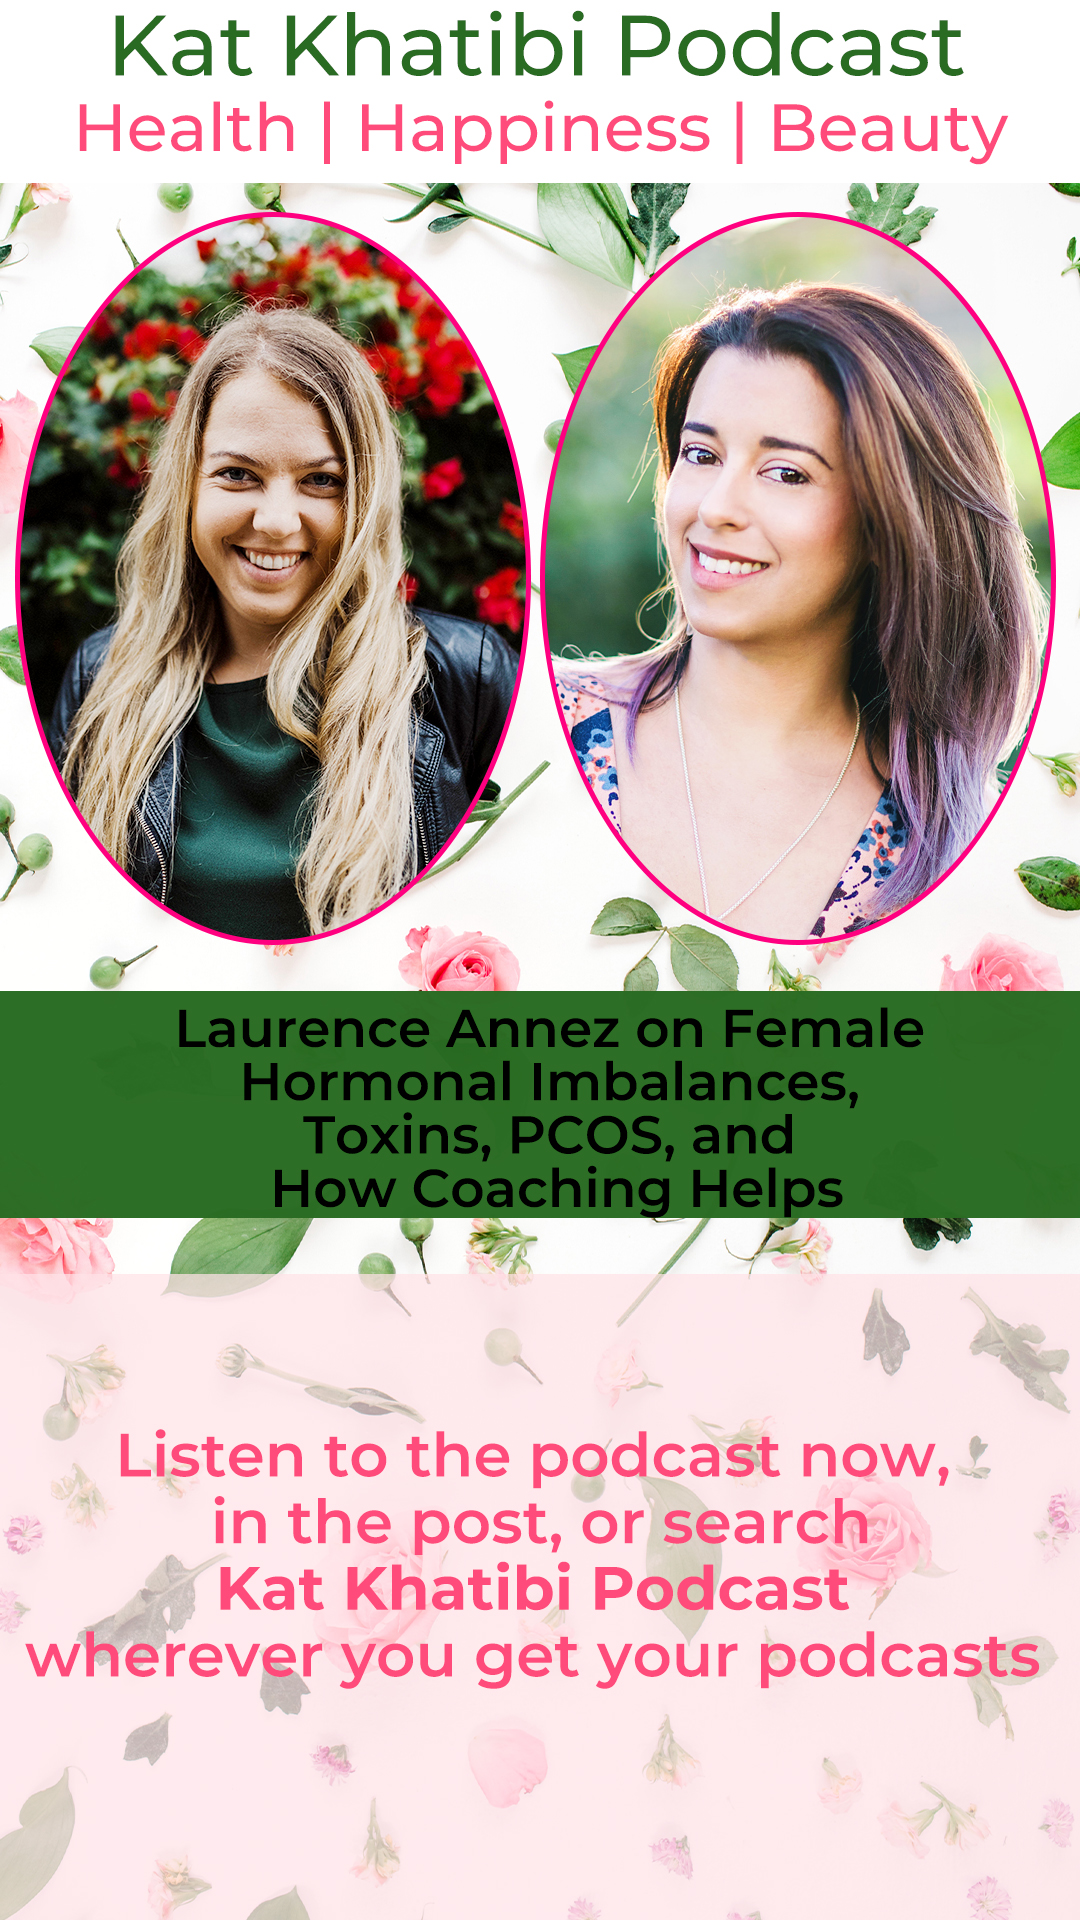 Laurence Annez on Female Hormonal Imbalances Toxins PCOS and How Coaching Helps